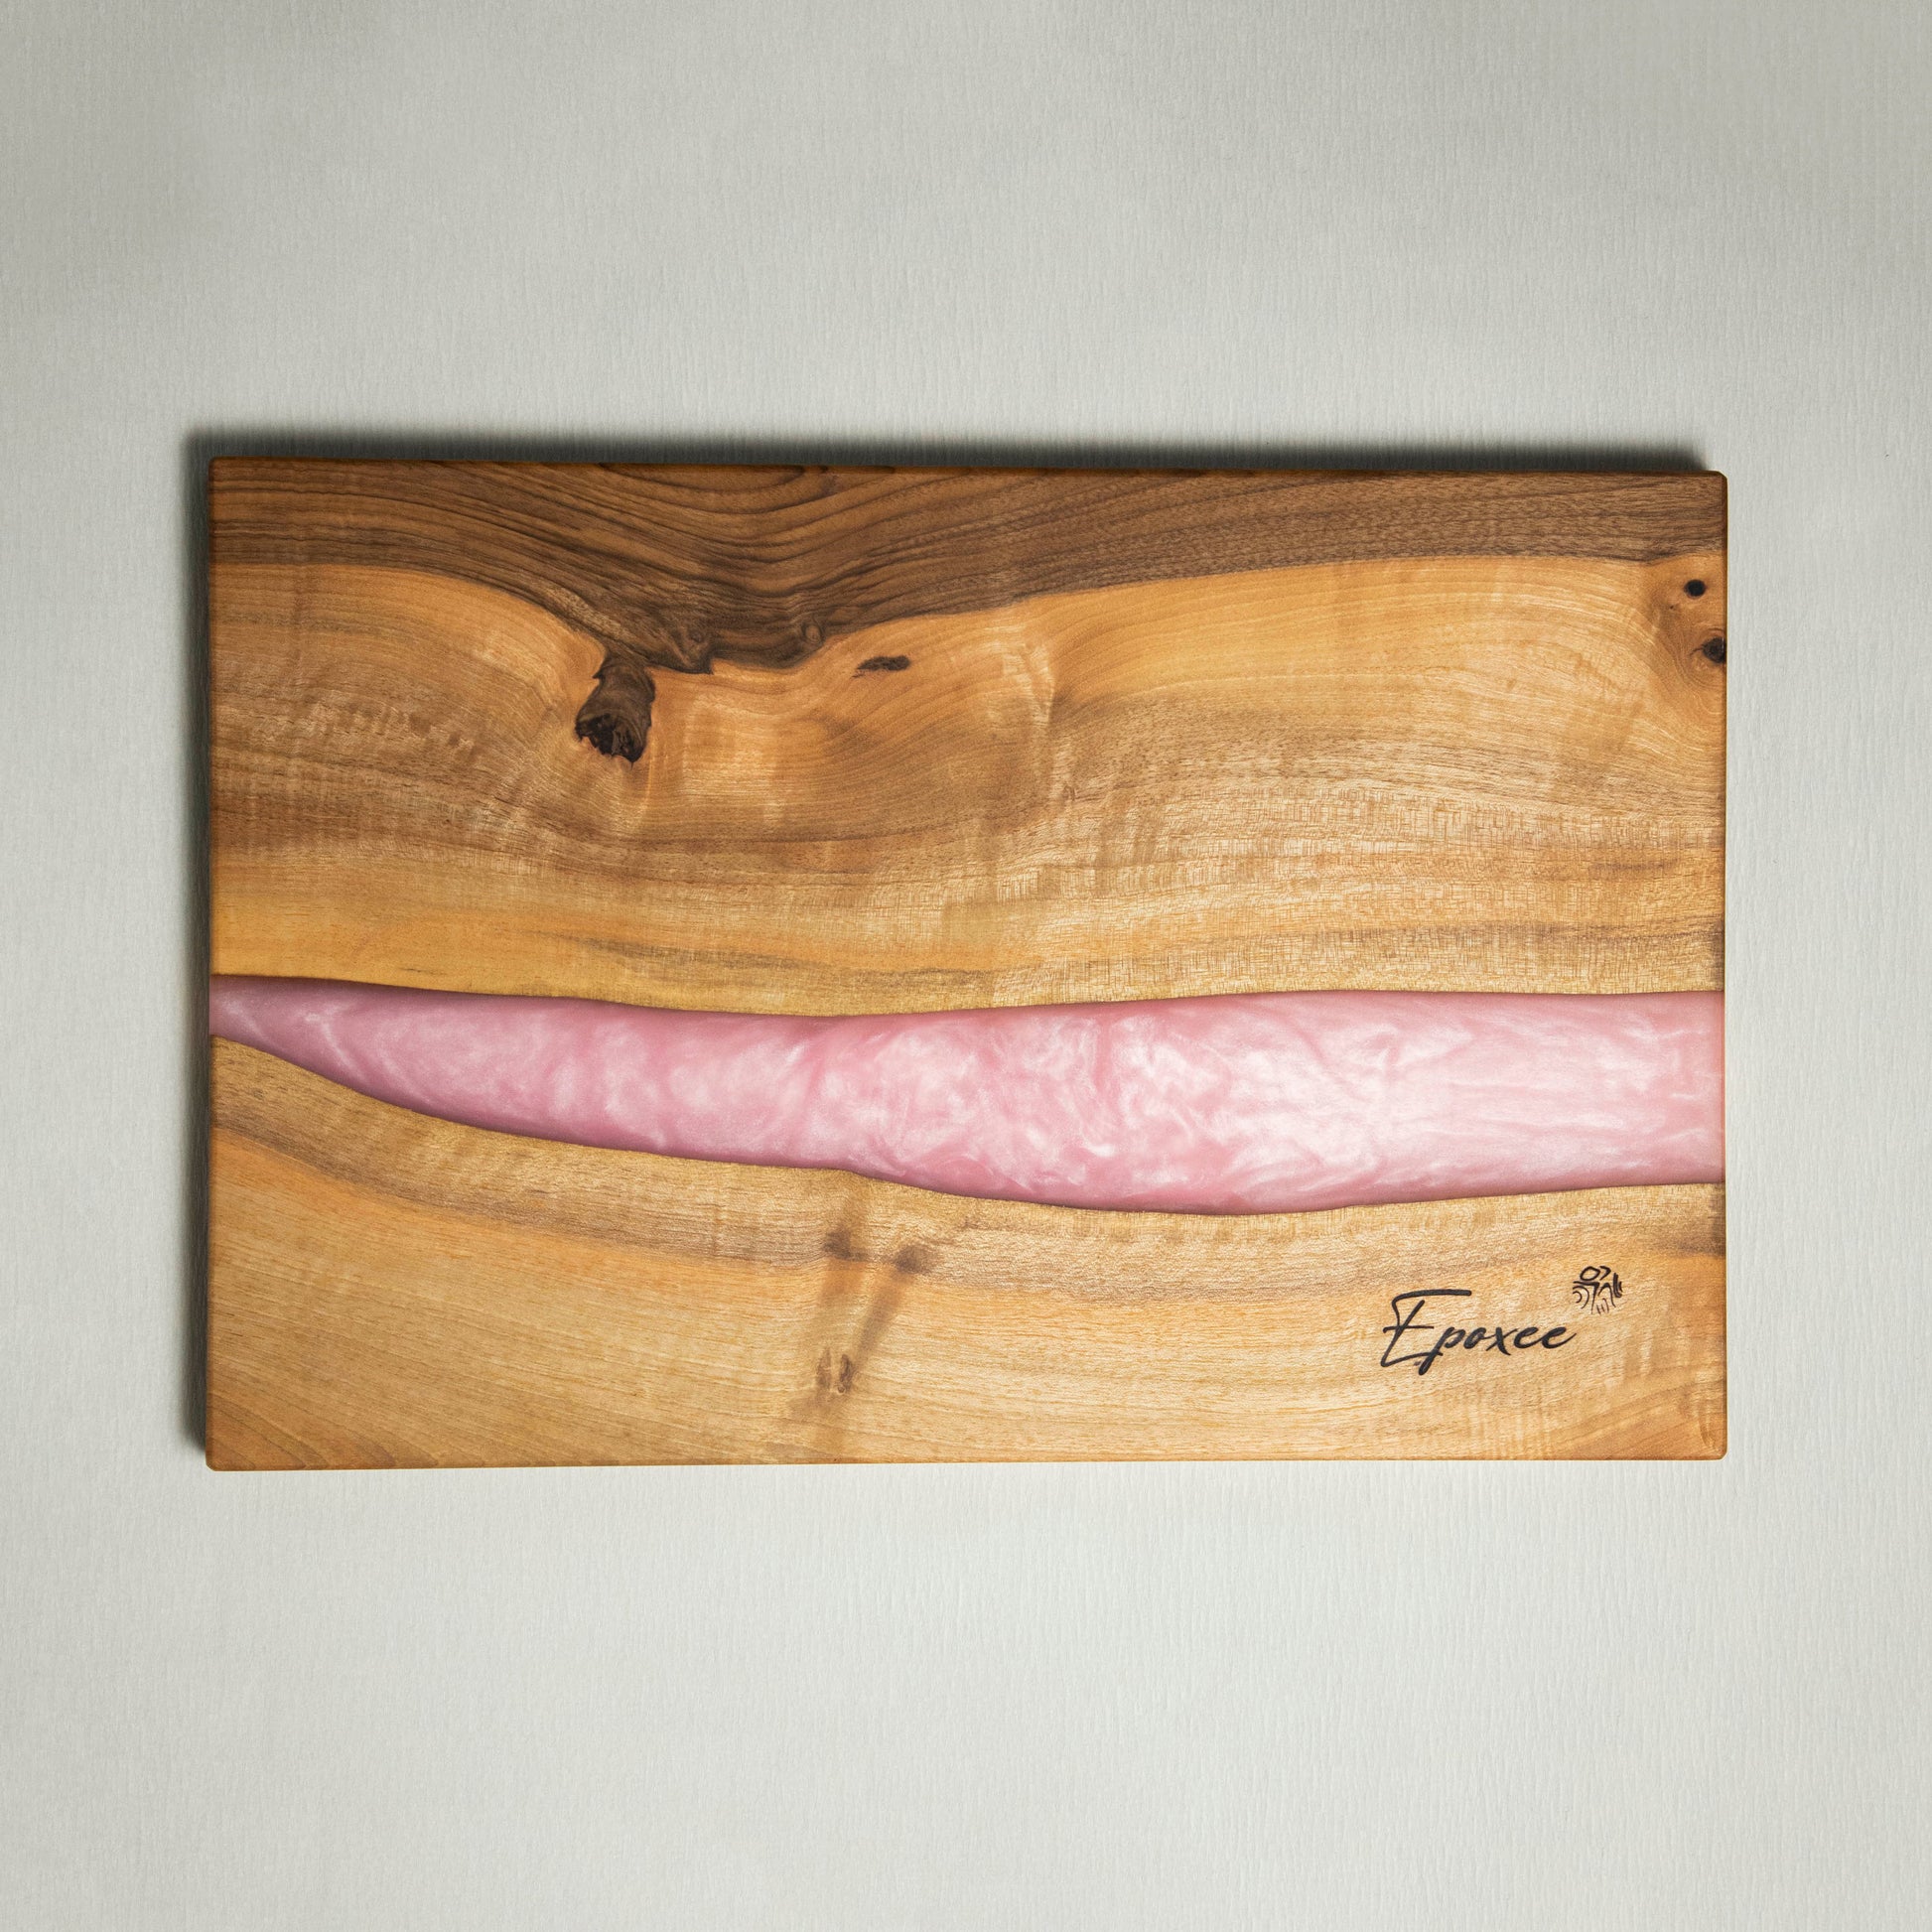 Serving board made from wood and epoxy resin in the color rose quartz